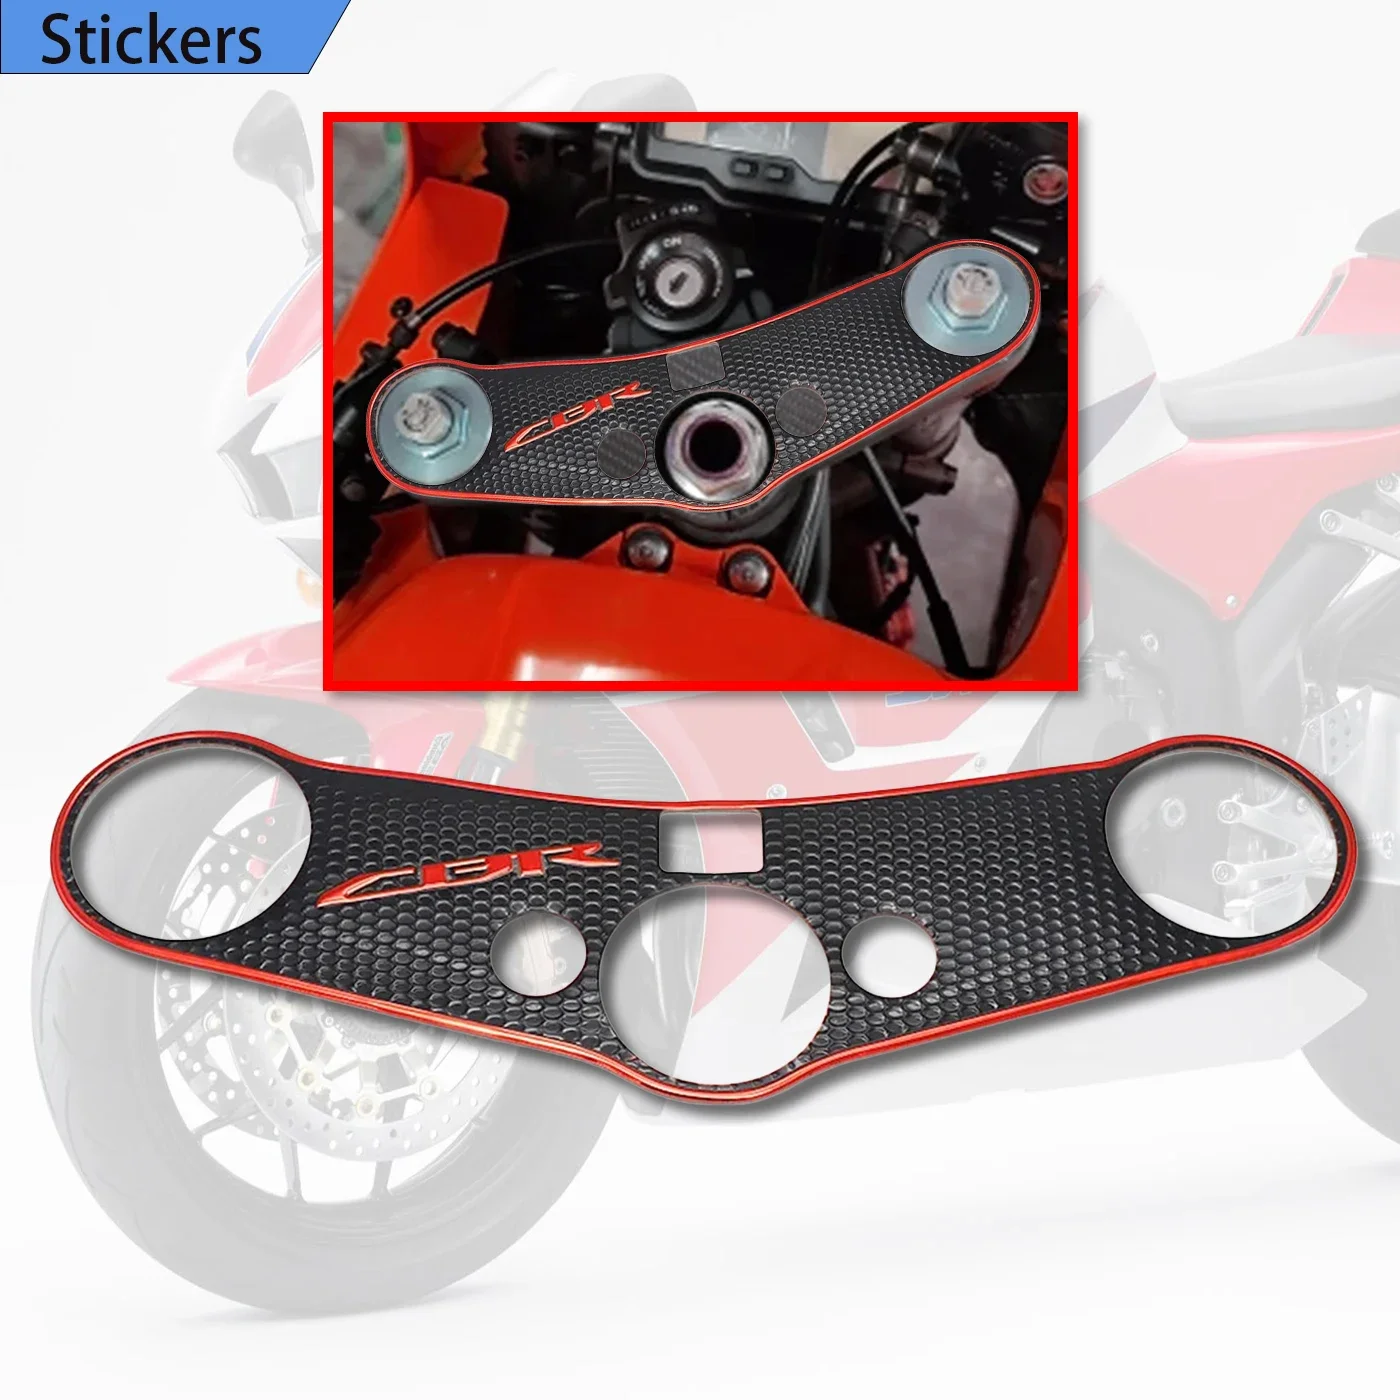 FIT HONDA CBR 600RR CBR600RR F5 Pad Triple Tree Top Clamp Upper Front End DECALS Motorcycle 2007-2017 2016 2015